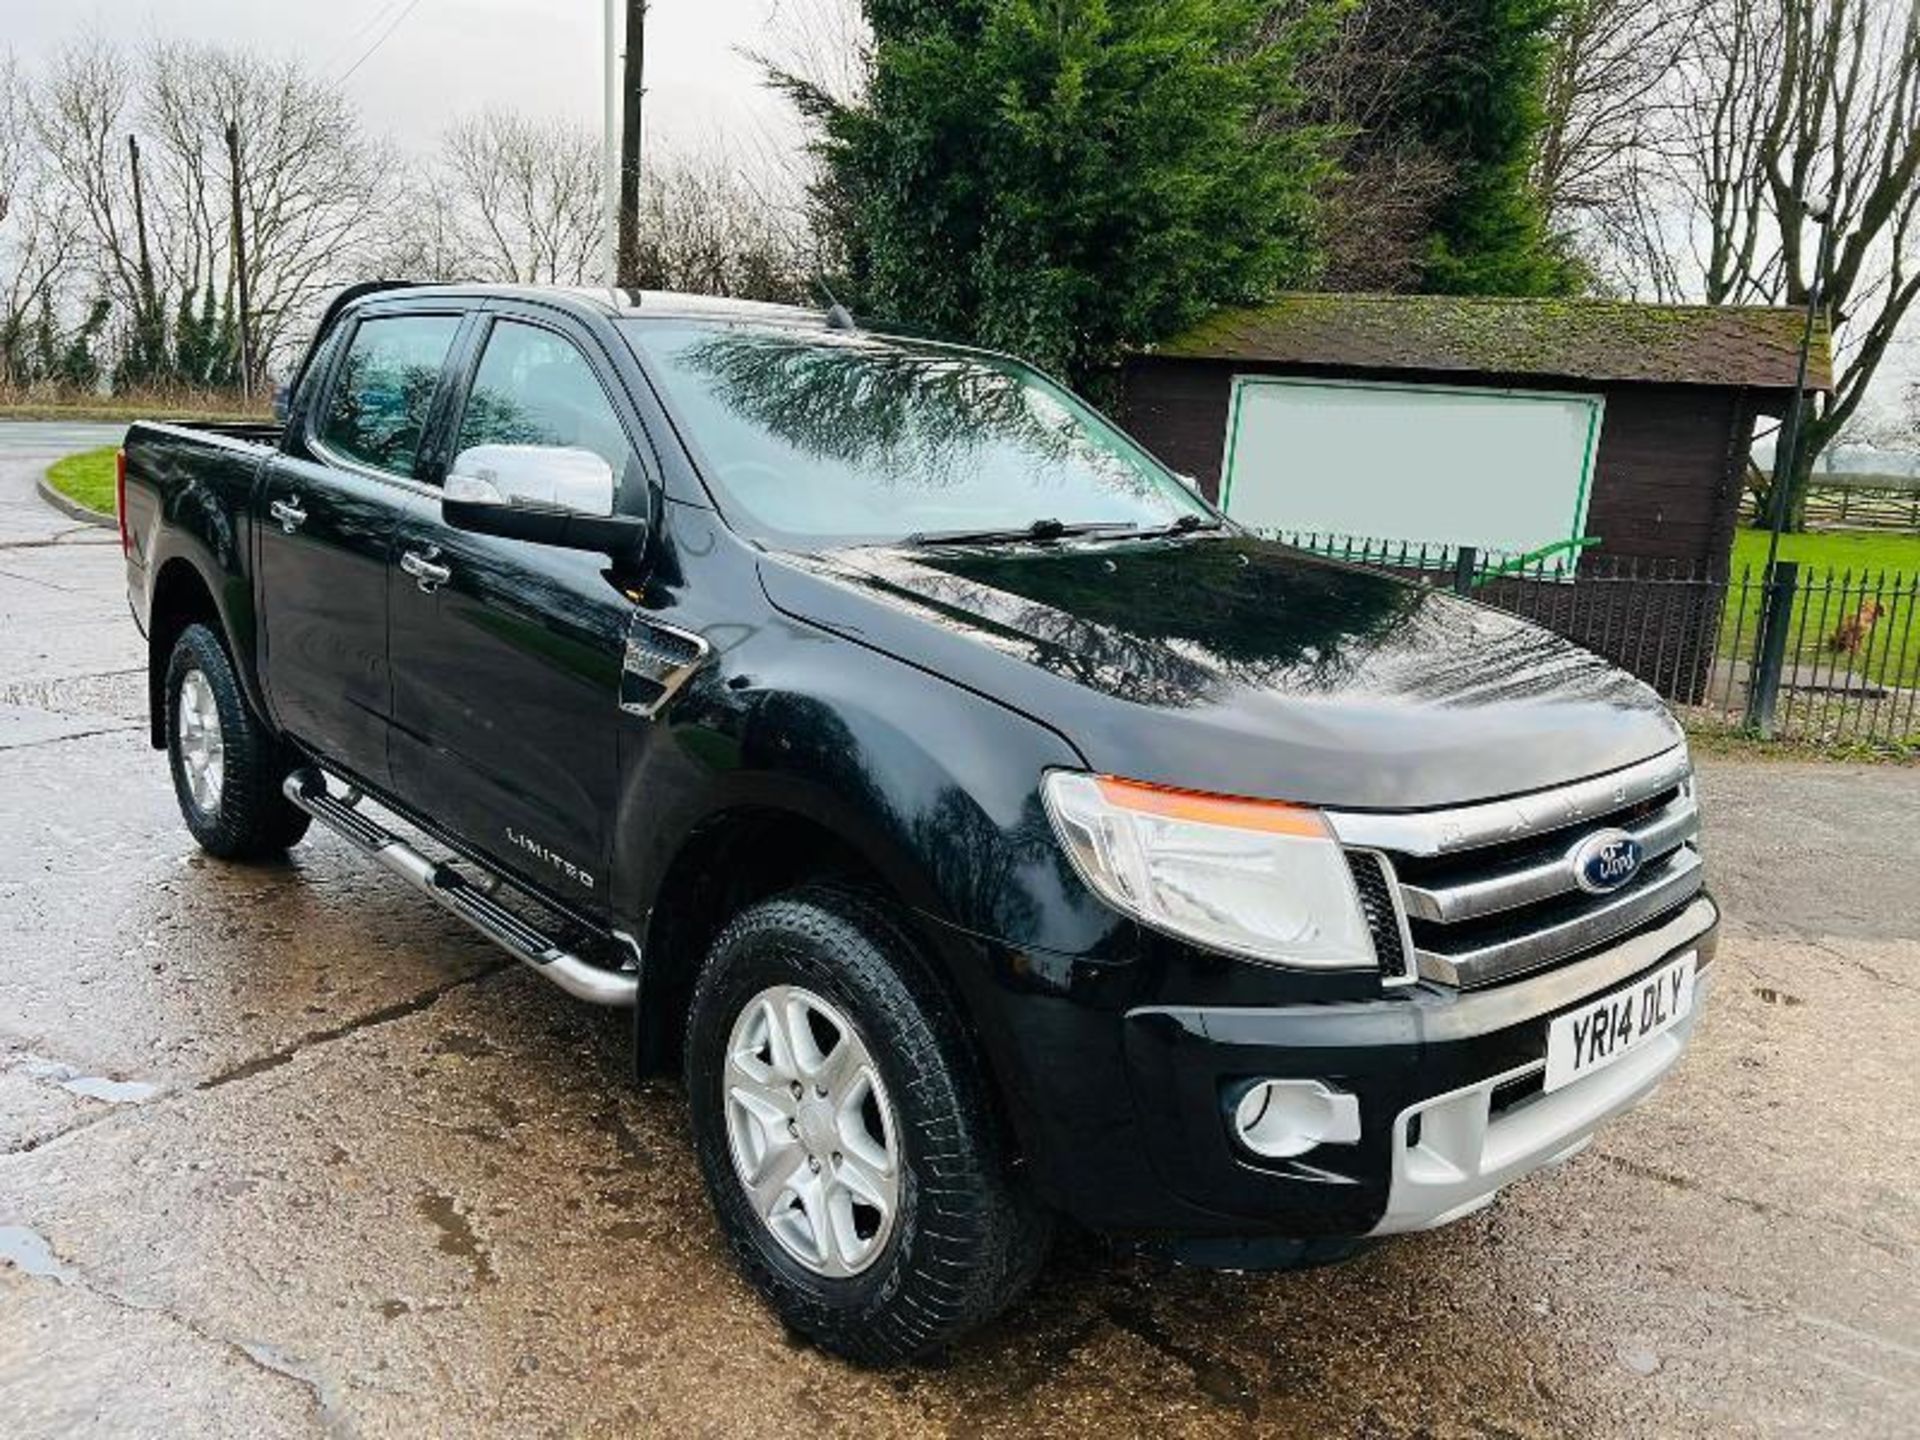 2014 FORD RANGER 3.2 LIMITED 4WD PICK UP